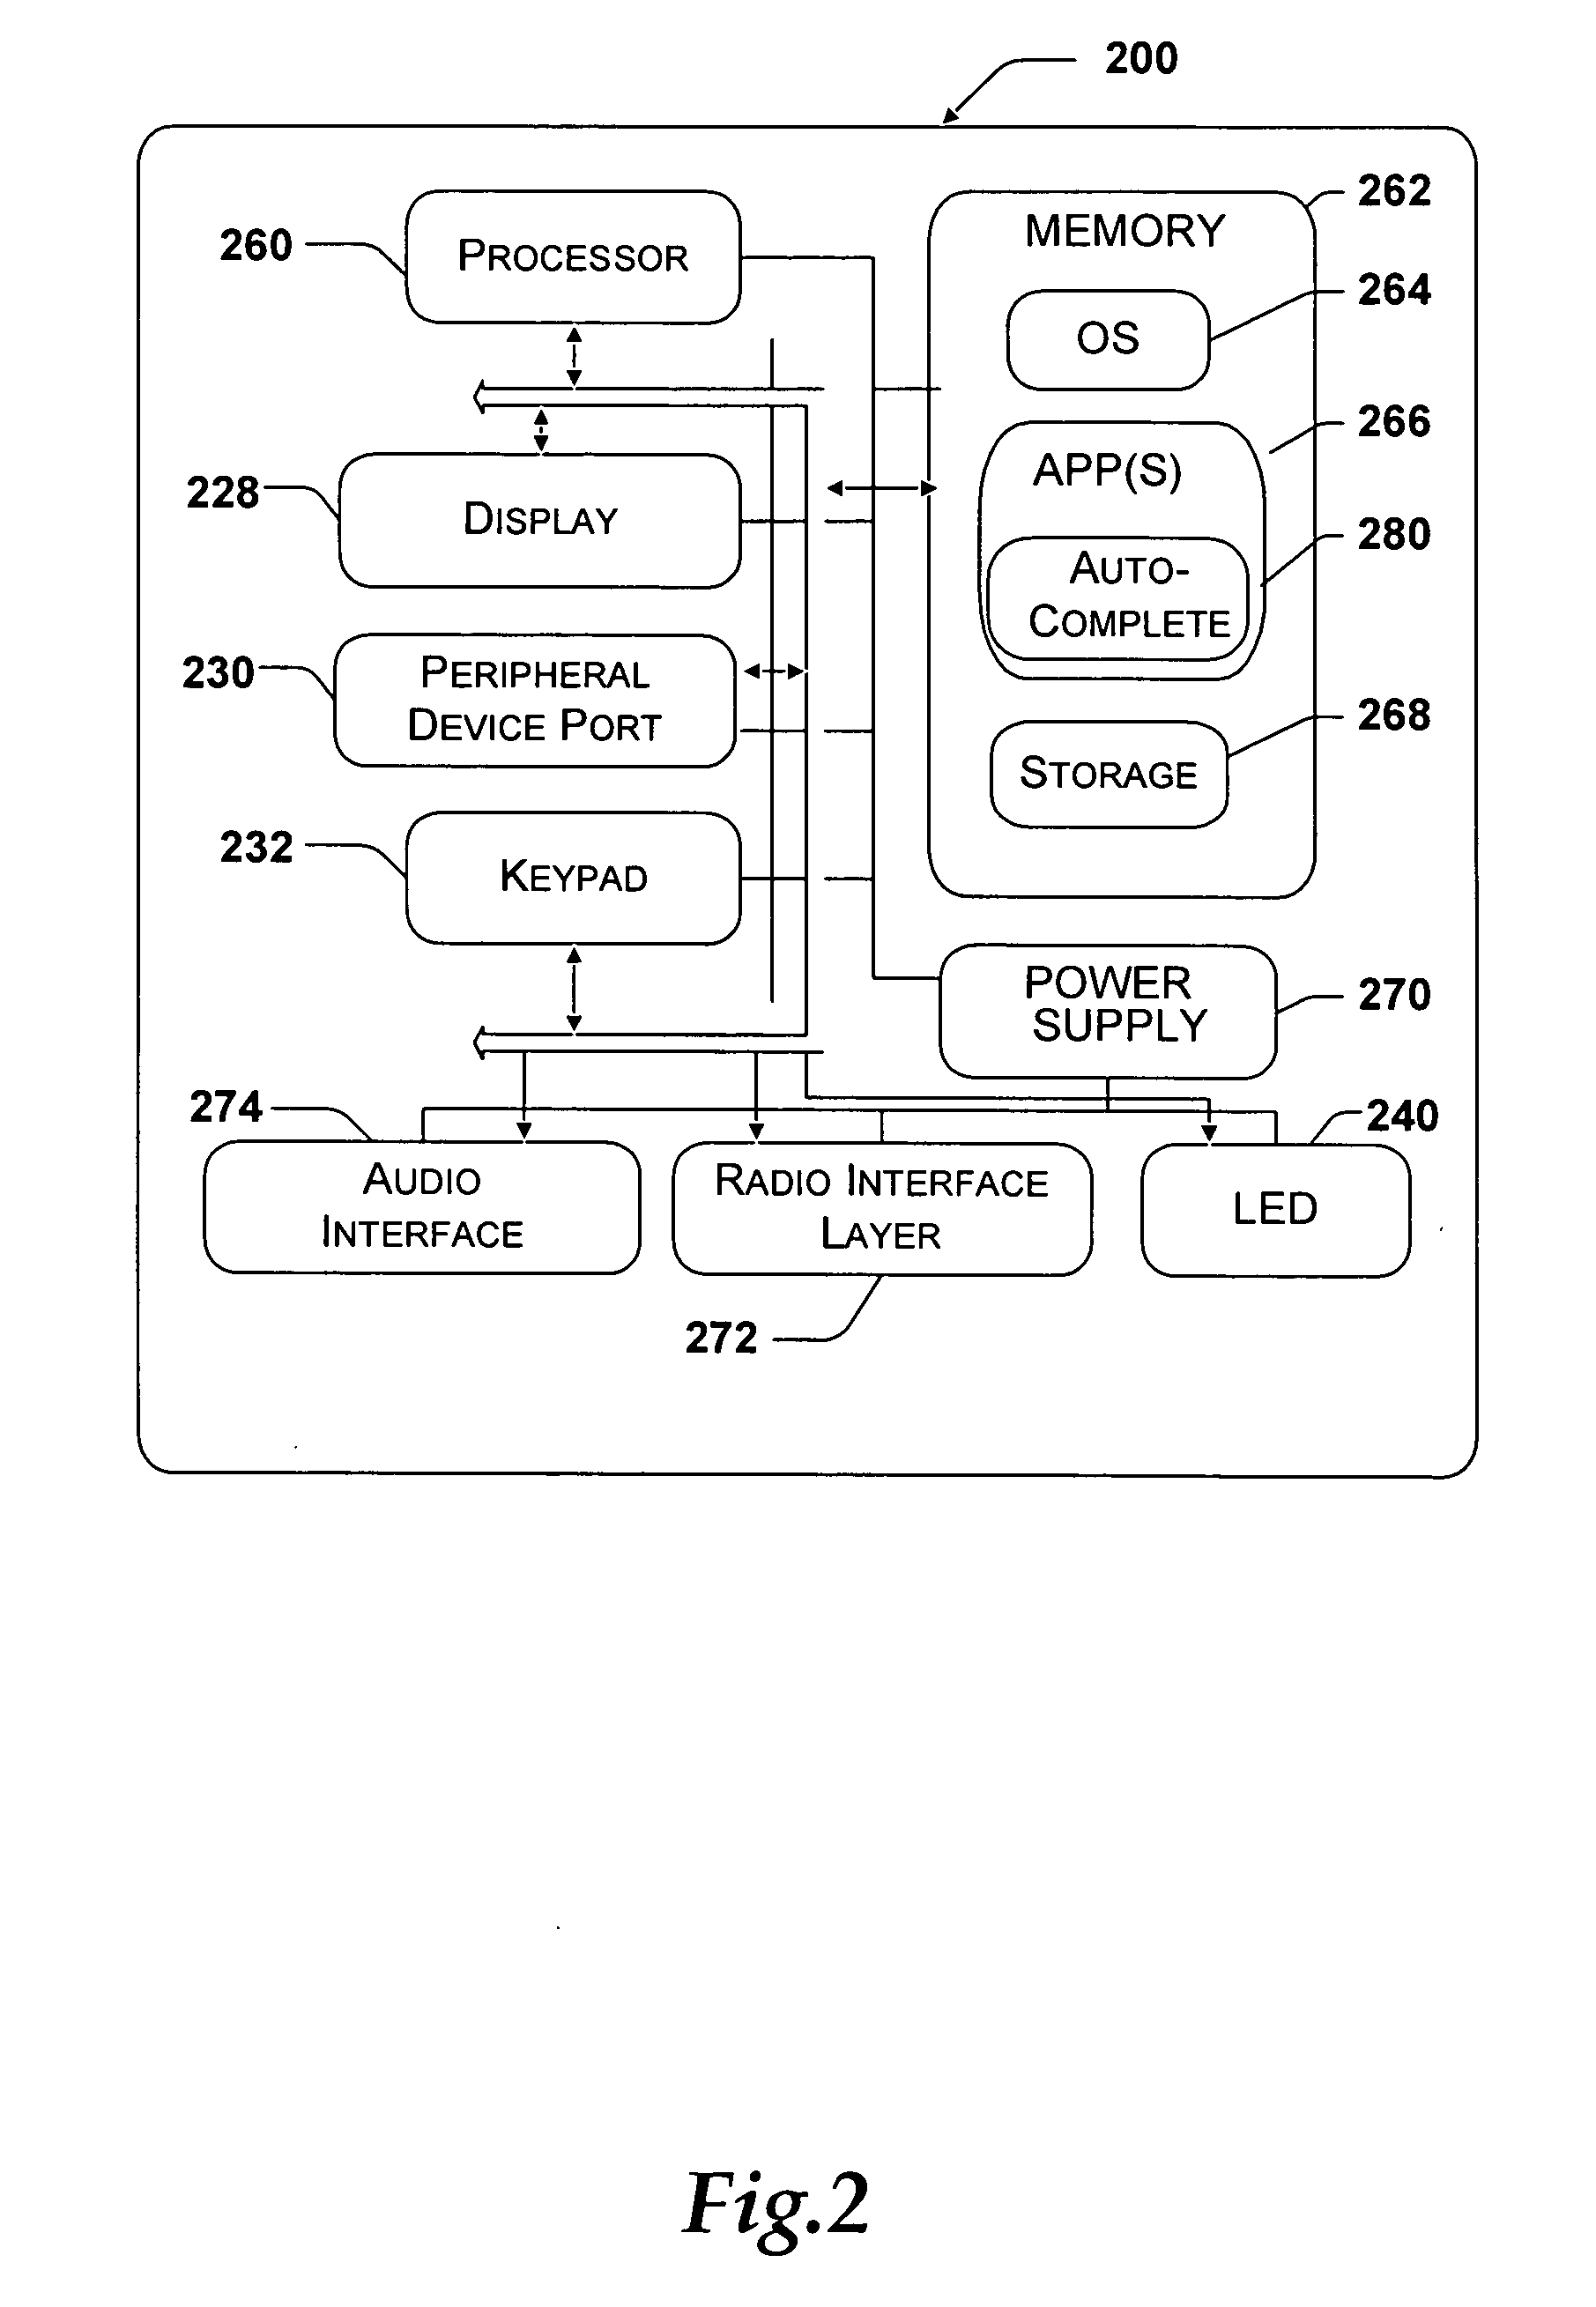 System and method for automatically completing spreadsheet formulas